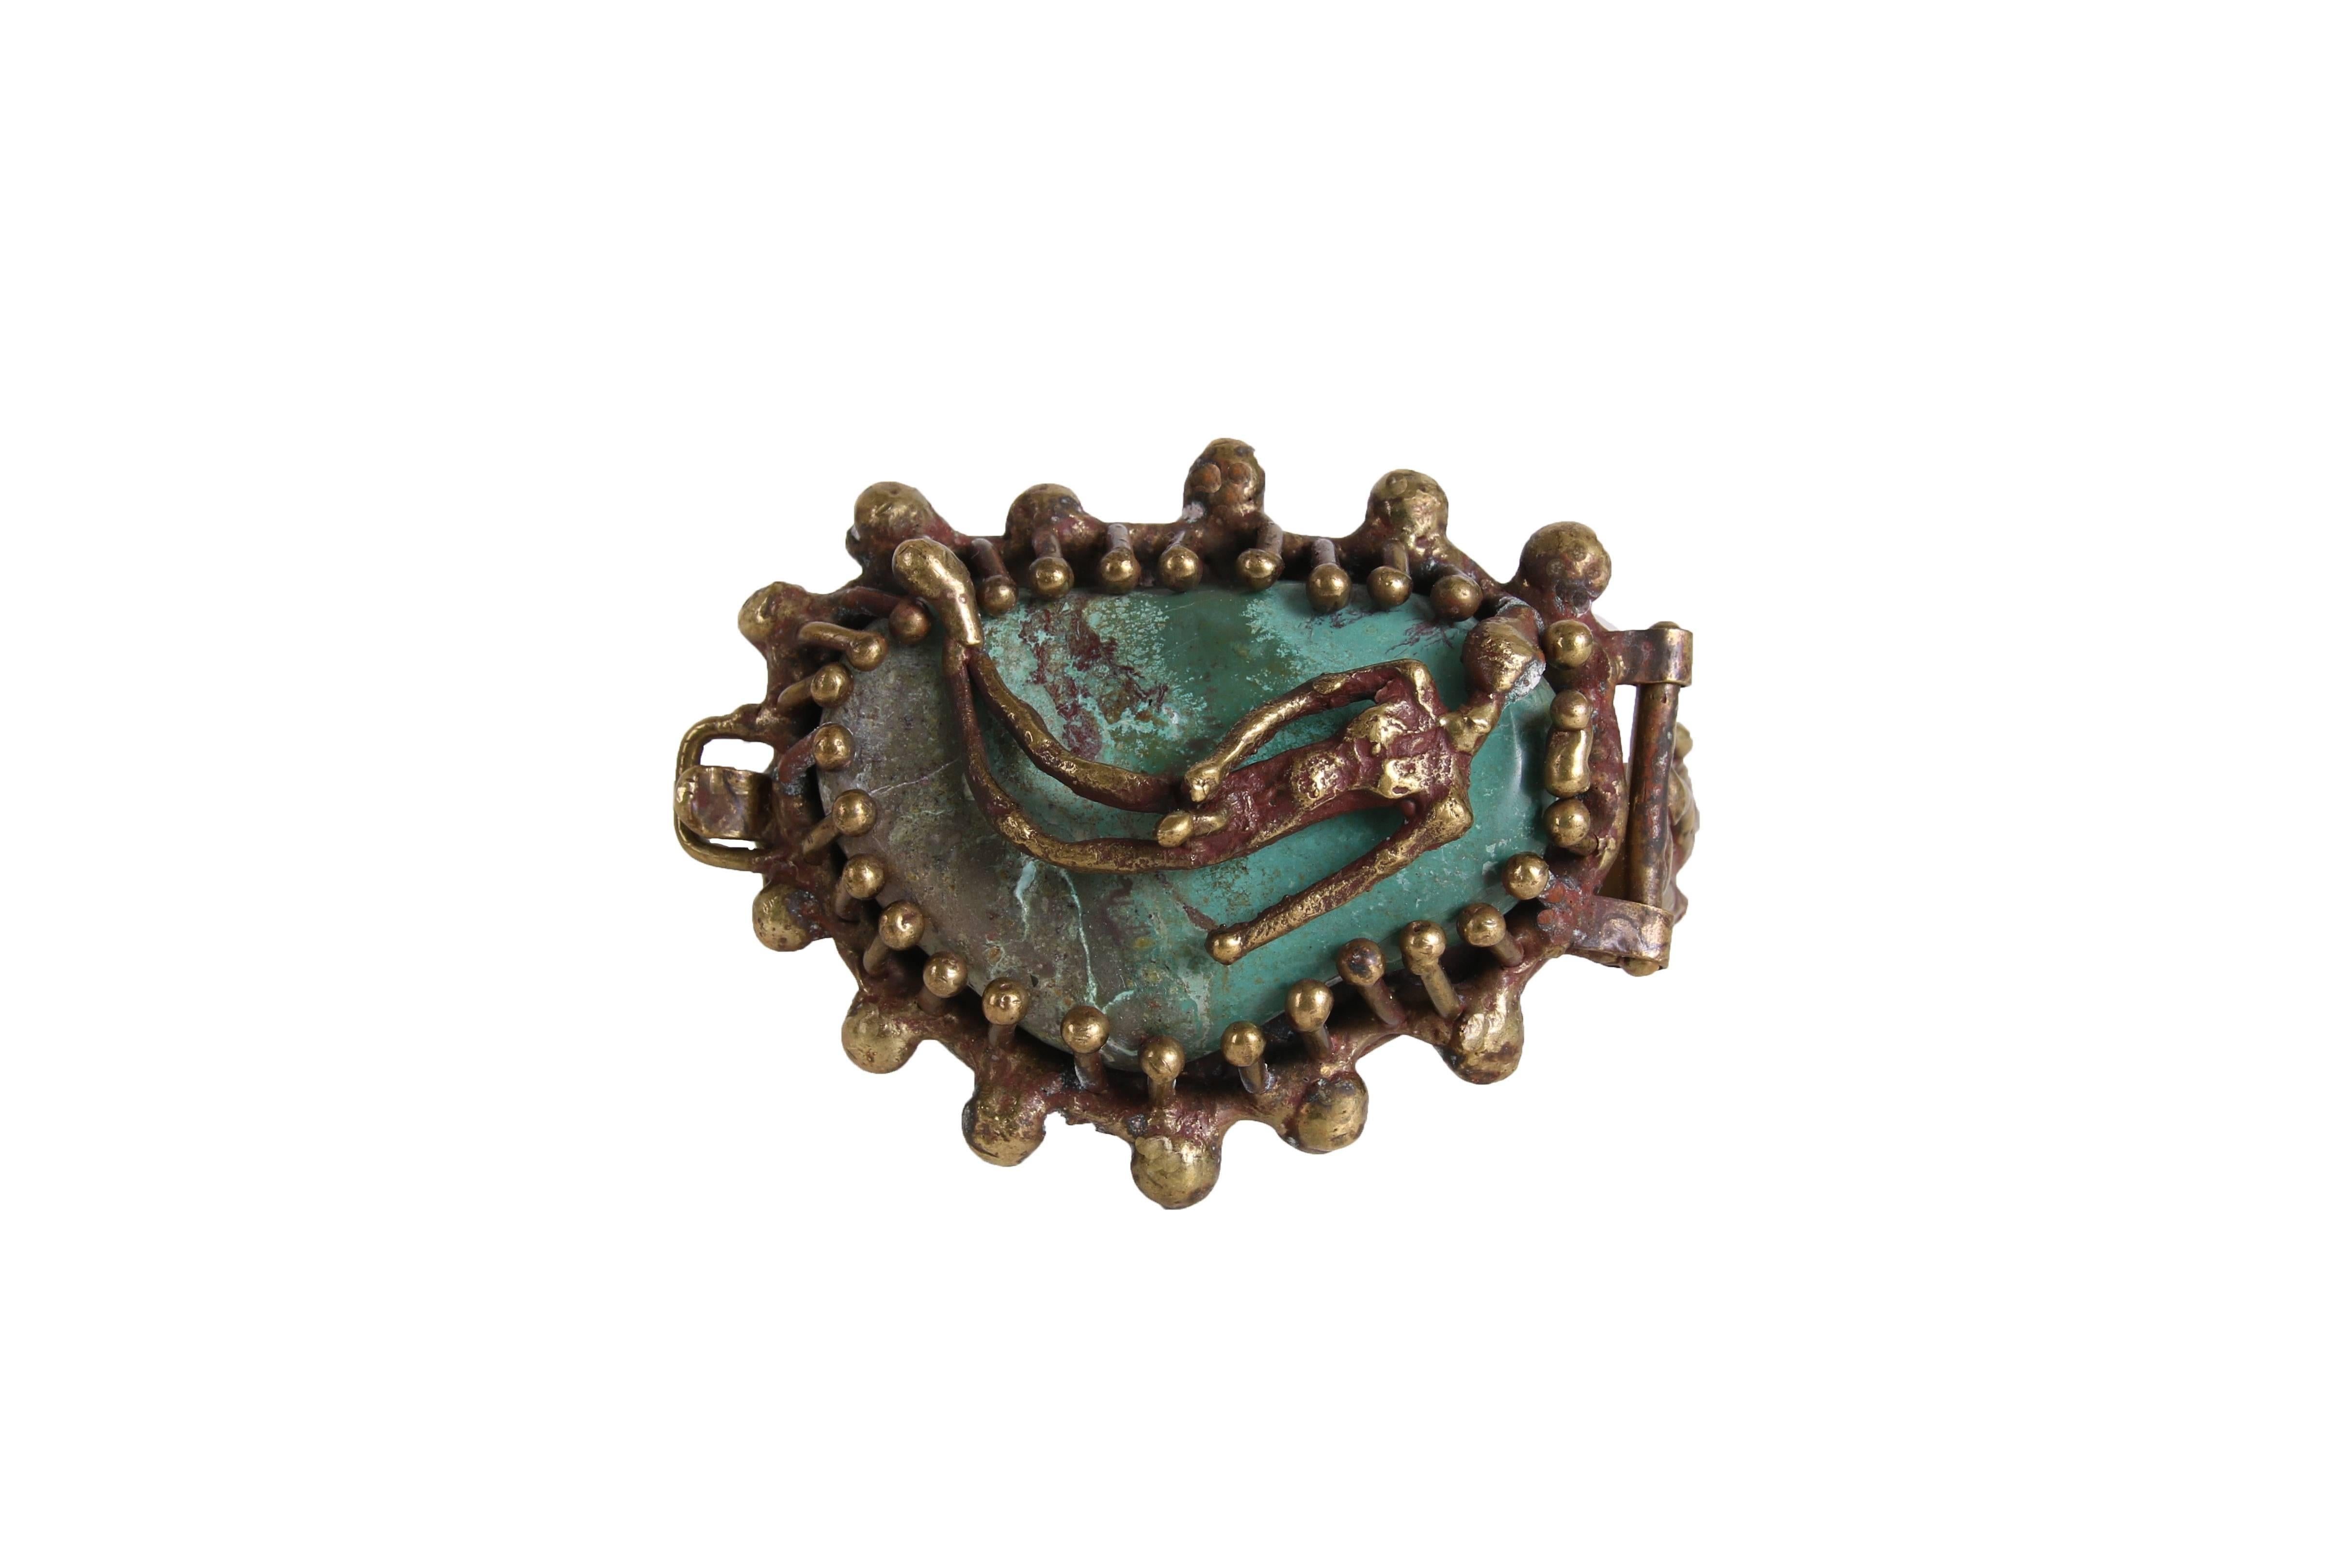 Pal Kepenyes brass hinged cuff bracelet with a figure over turquoise. In excellent condition -stamped 